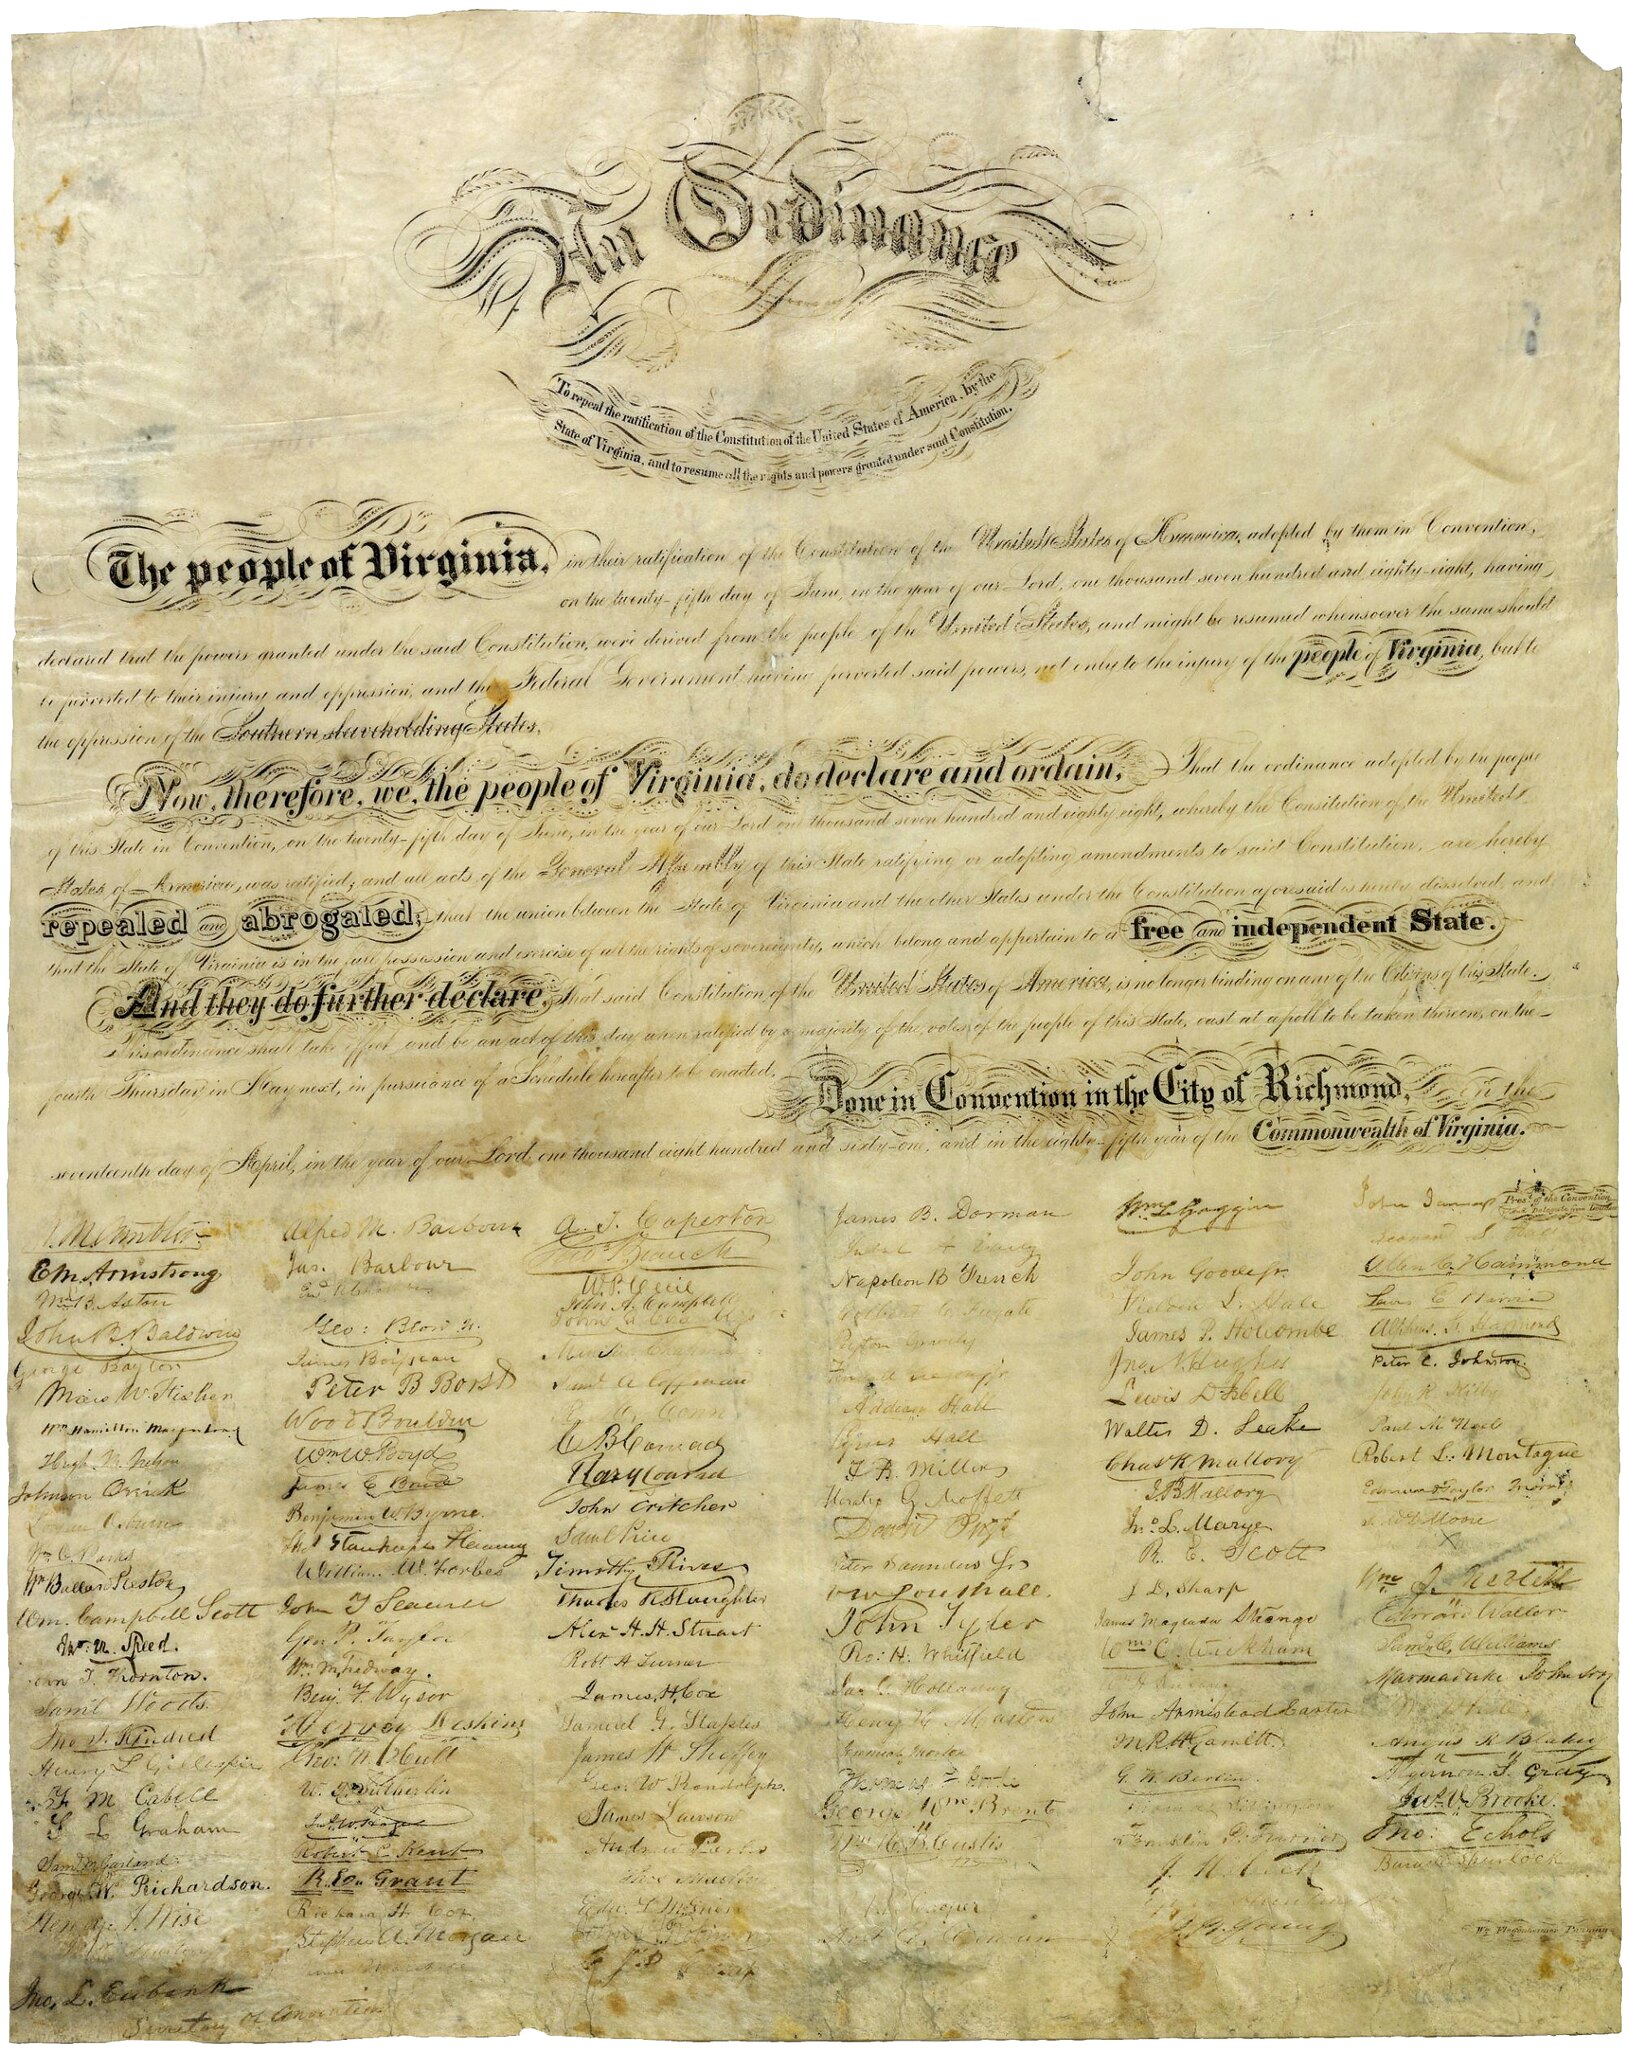 Virginia Ordinance of Secession, April 17, 1861. This ordinance shall take effect, and be an act of this day when ratified by a majority of the votes of the people of this State, cast at a poll to be taken thereon, on the fourth Thursday in May next